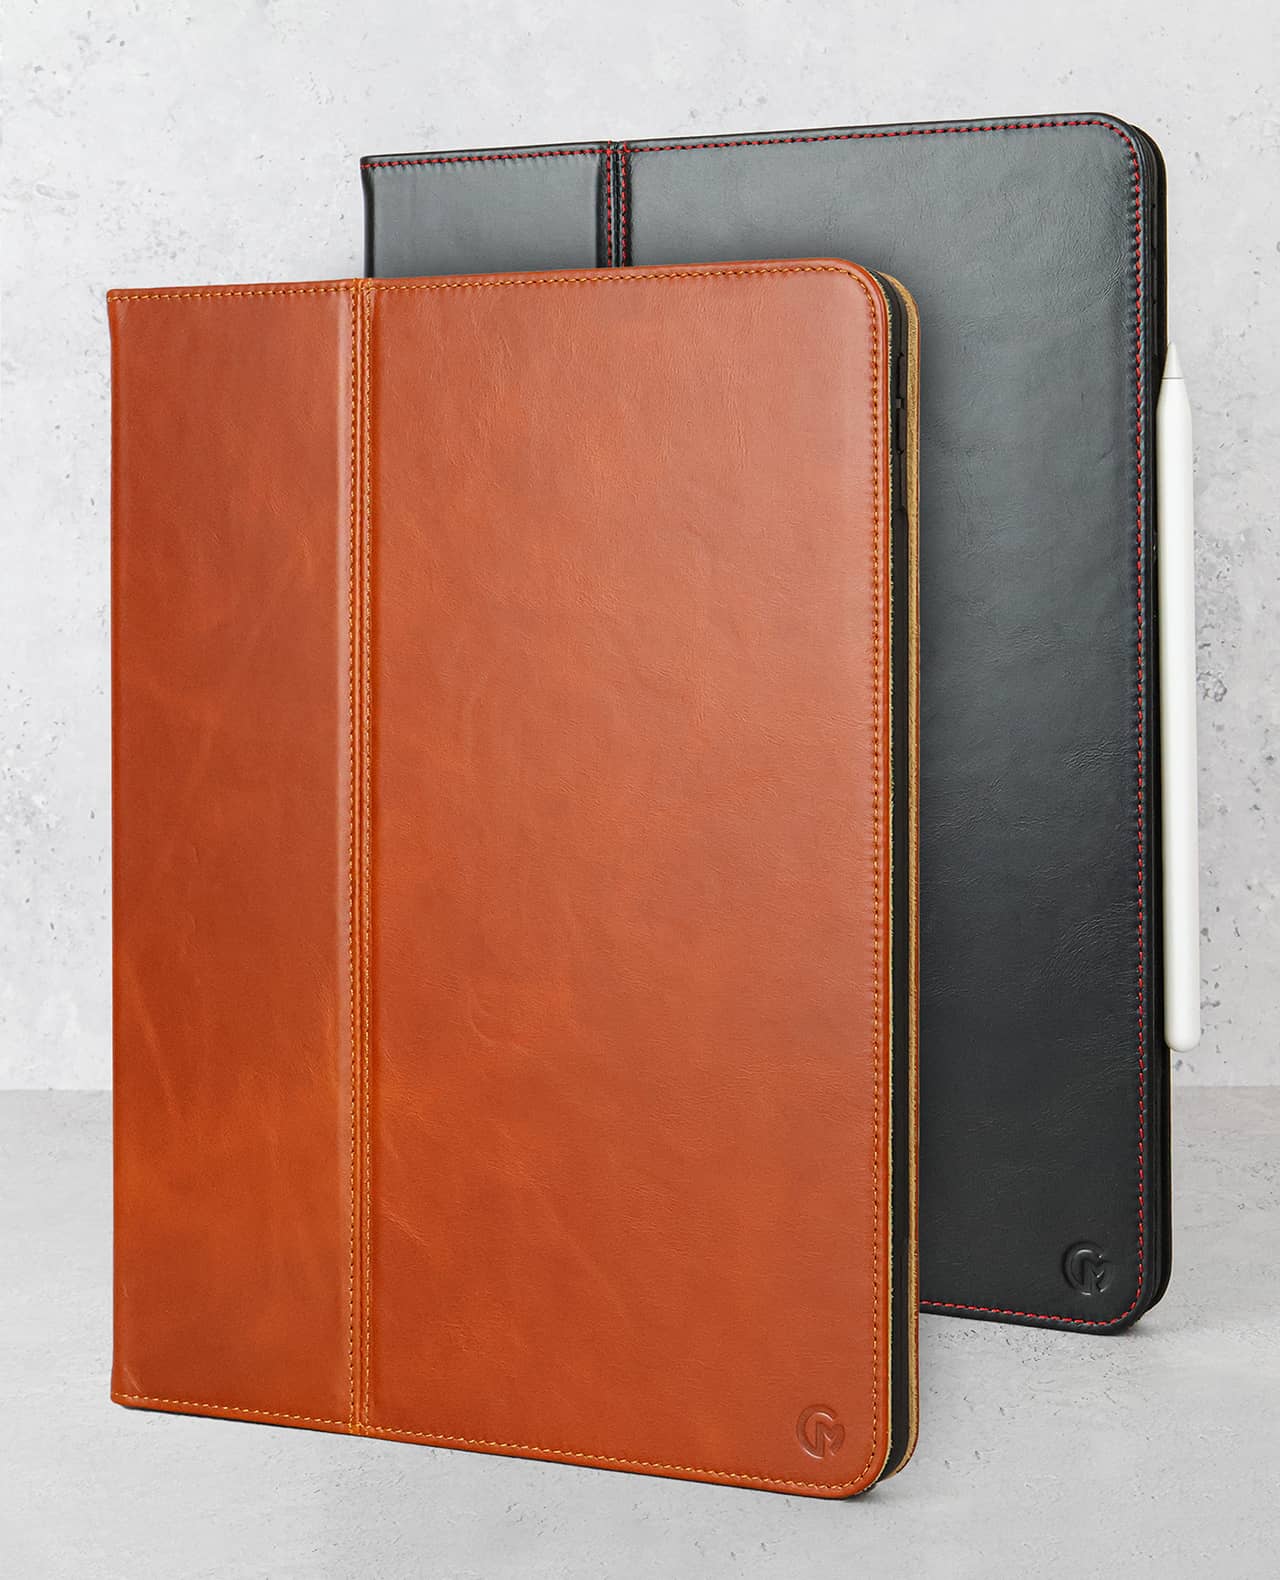 Zipped Case for iPad Pro 12.9” M1 / M2 - Tan - Granulated Leather